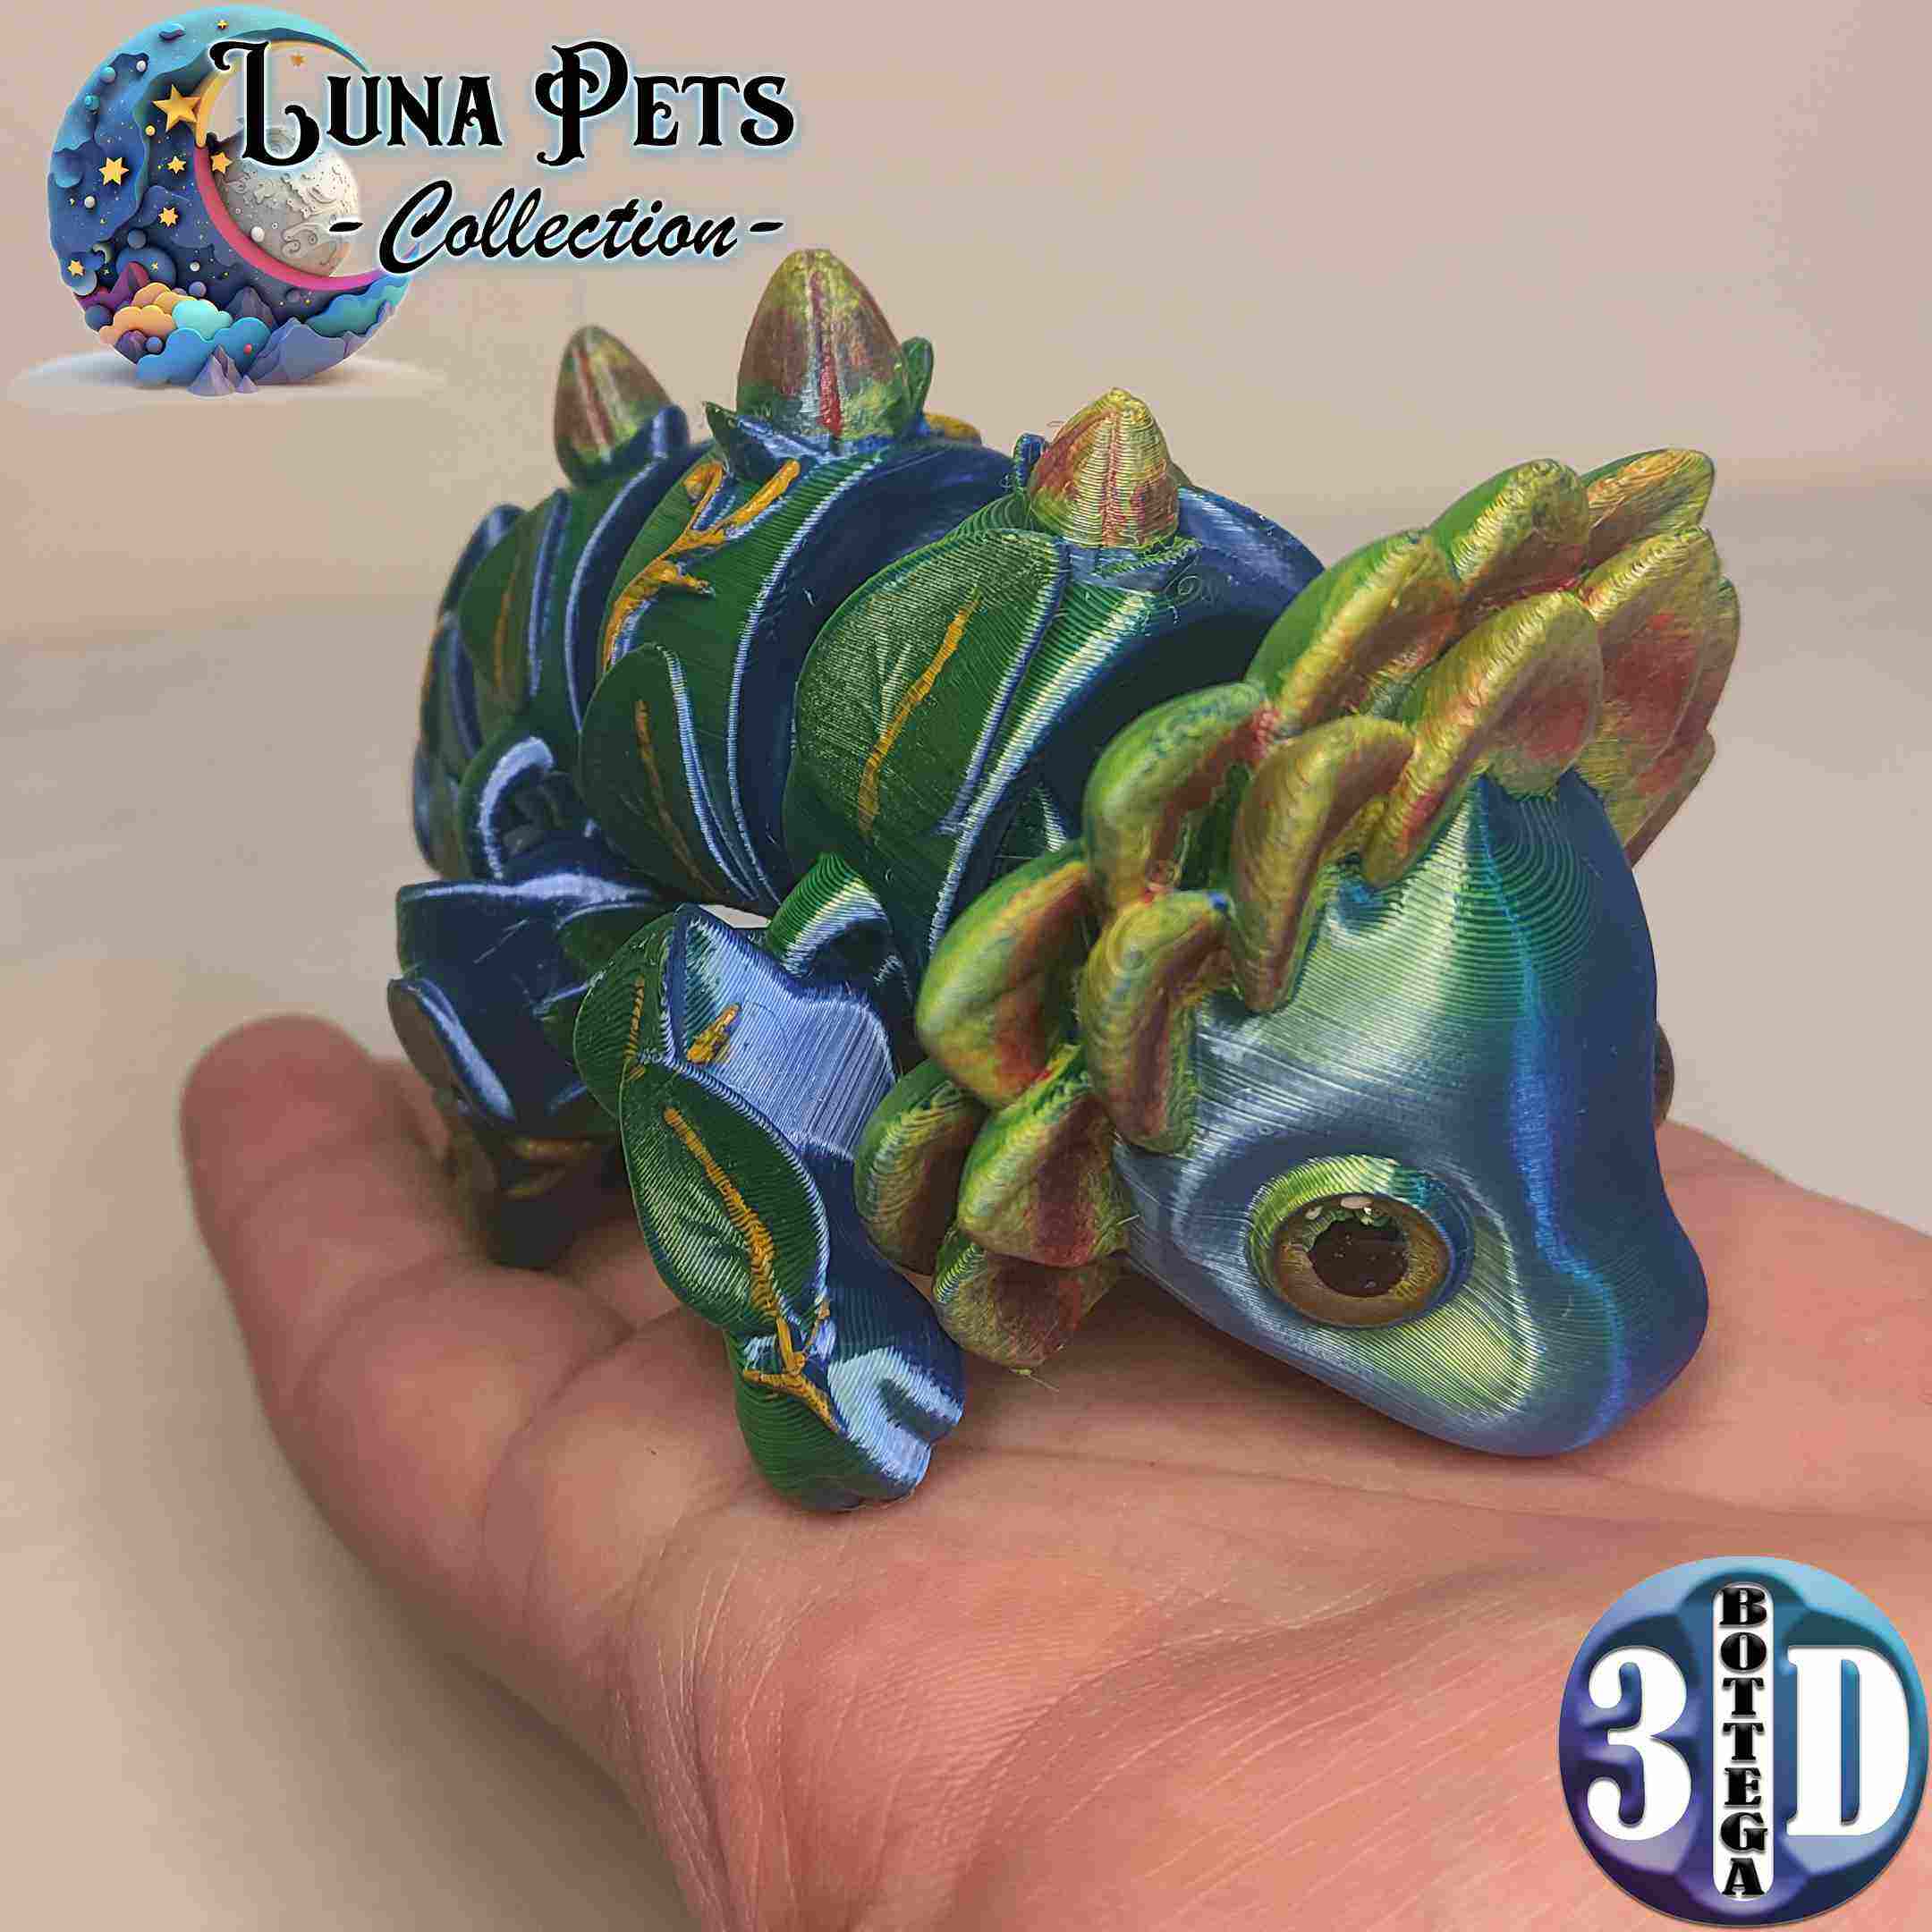 LUNA PETS COLLECTION - Sunflowern - articulated baby dragon-0